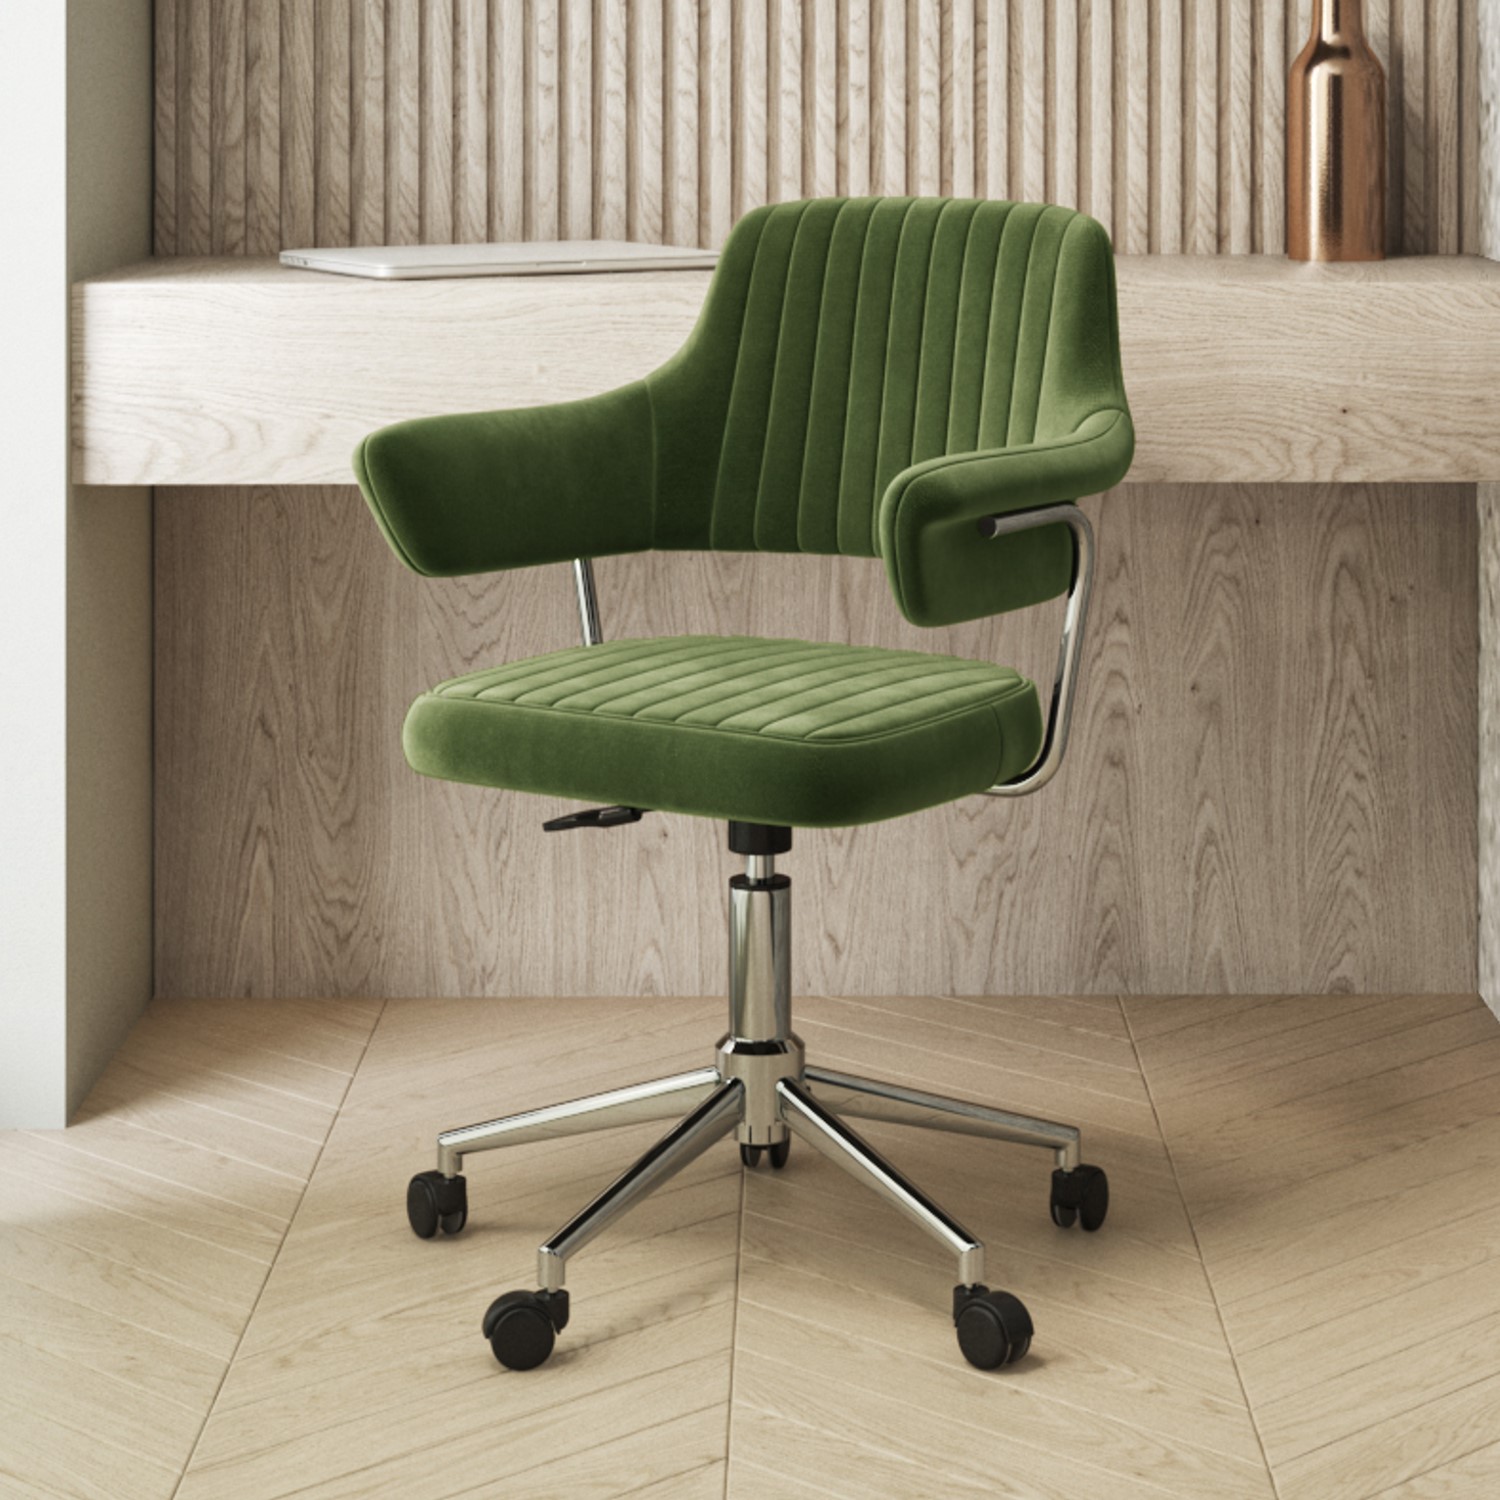 Read more about Olive green velvet swivel office chair with arms fenix